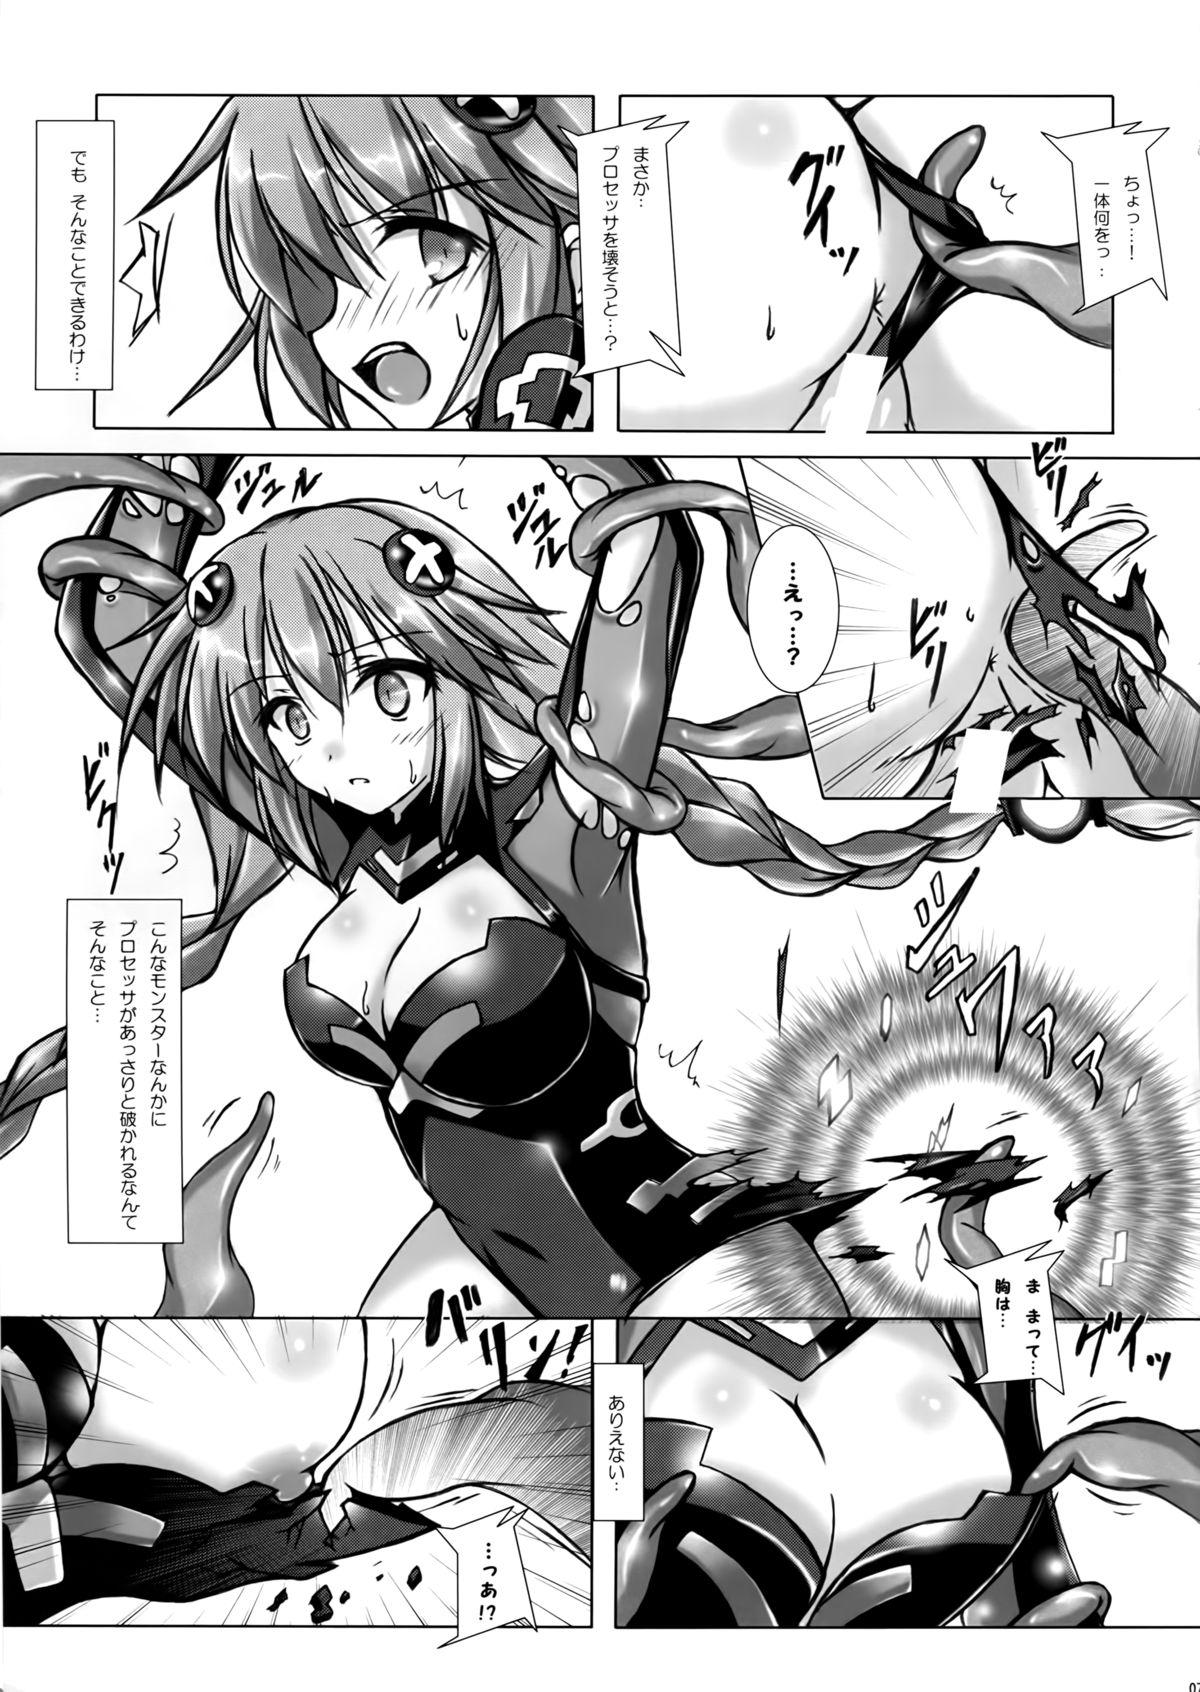 Whooty Tentacle Syndrome - Hyperdimension neptunia Dorm - Page 7